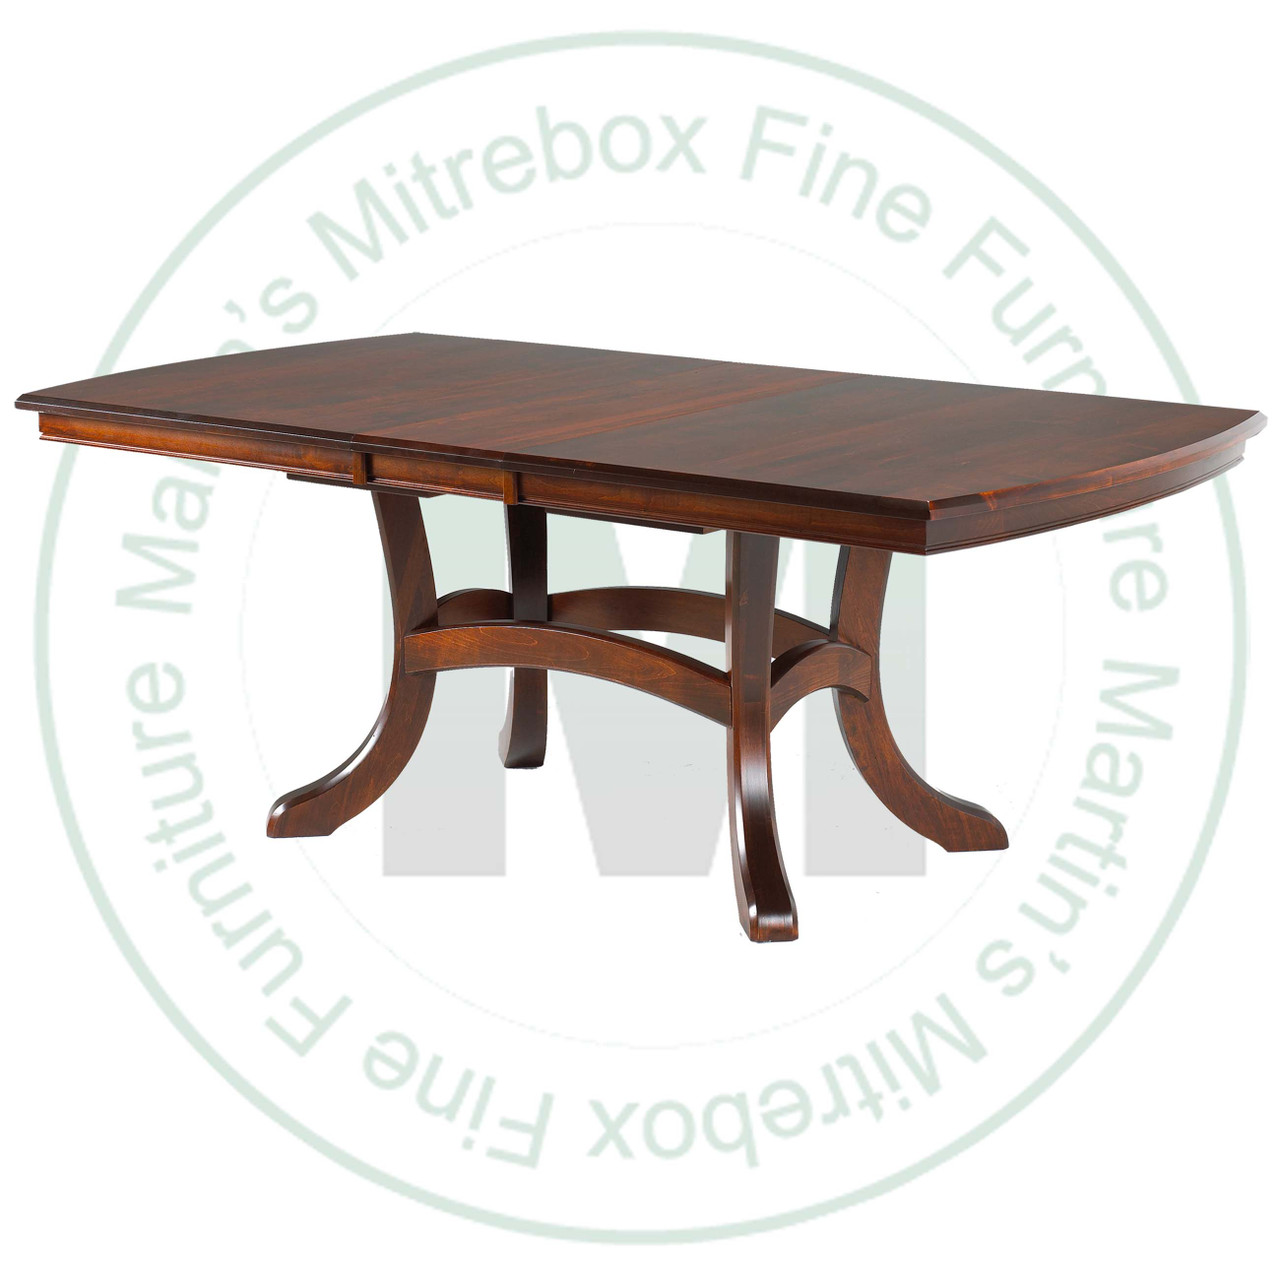 Maple Jordan Double Pedestal Solid Top Table 54''D x 108''W x 30''H. Table Has 1.25'' Thick Top